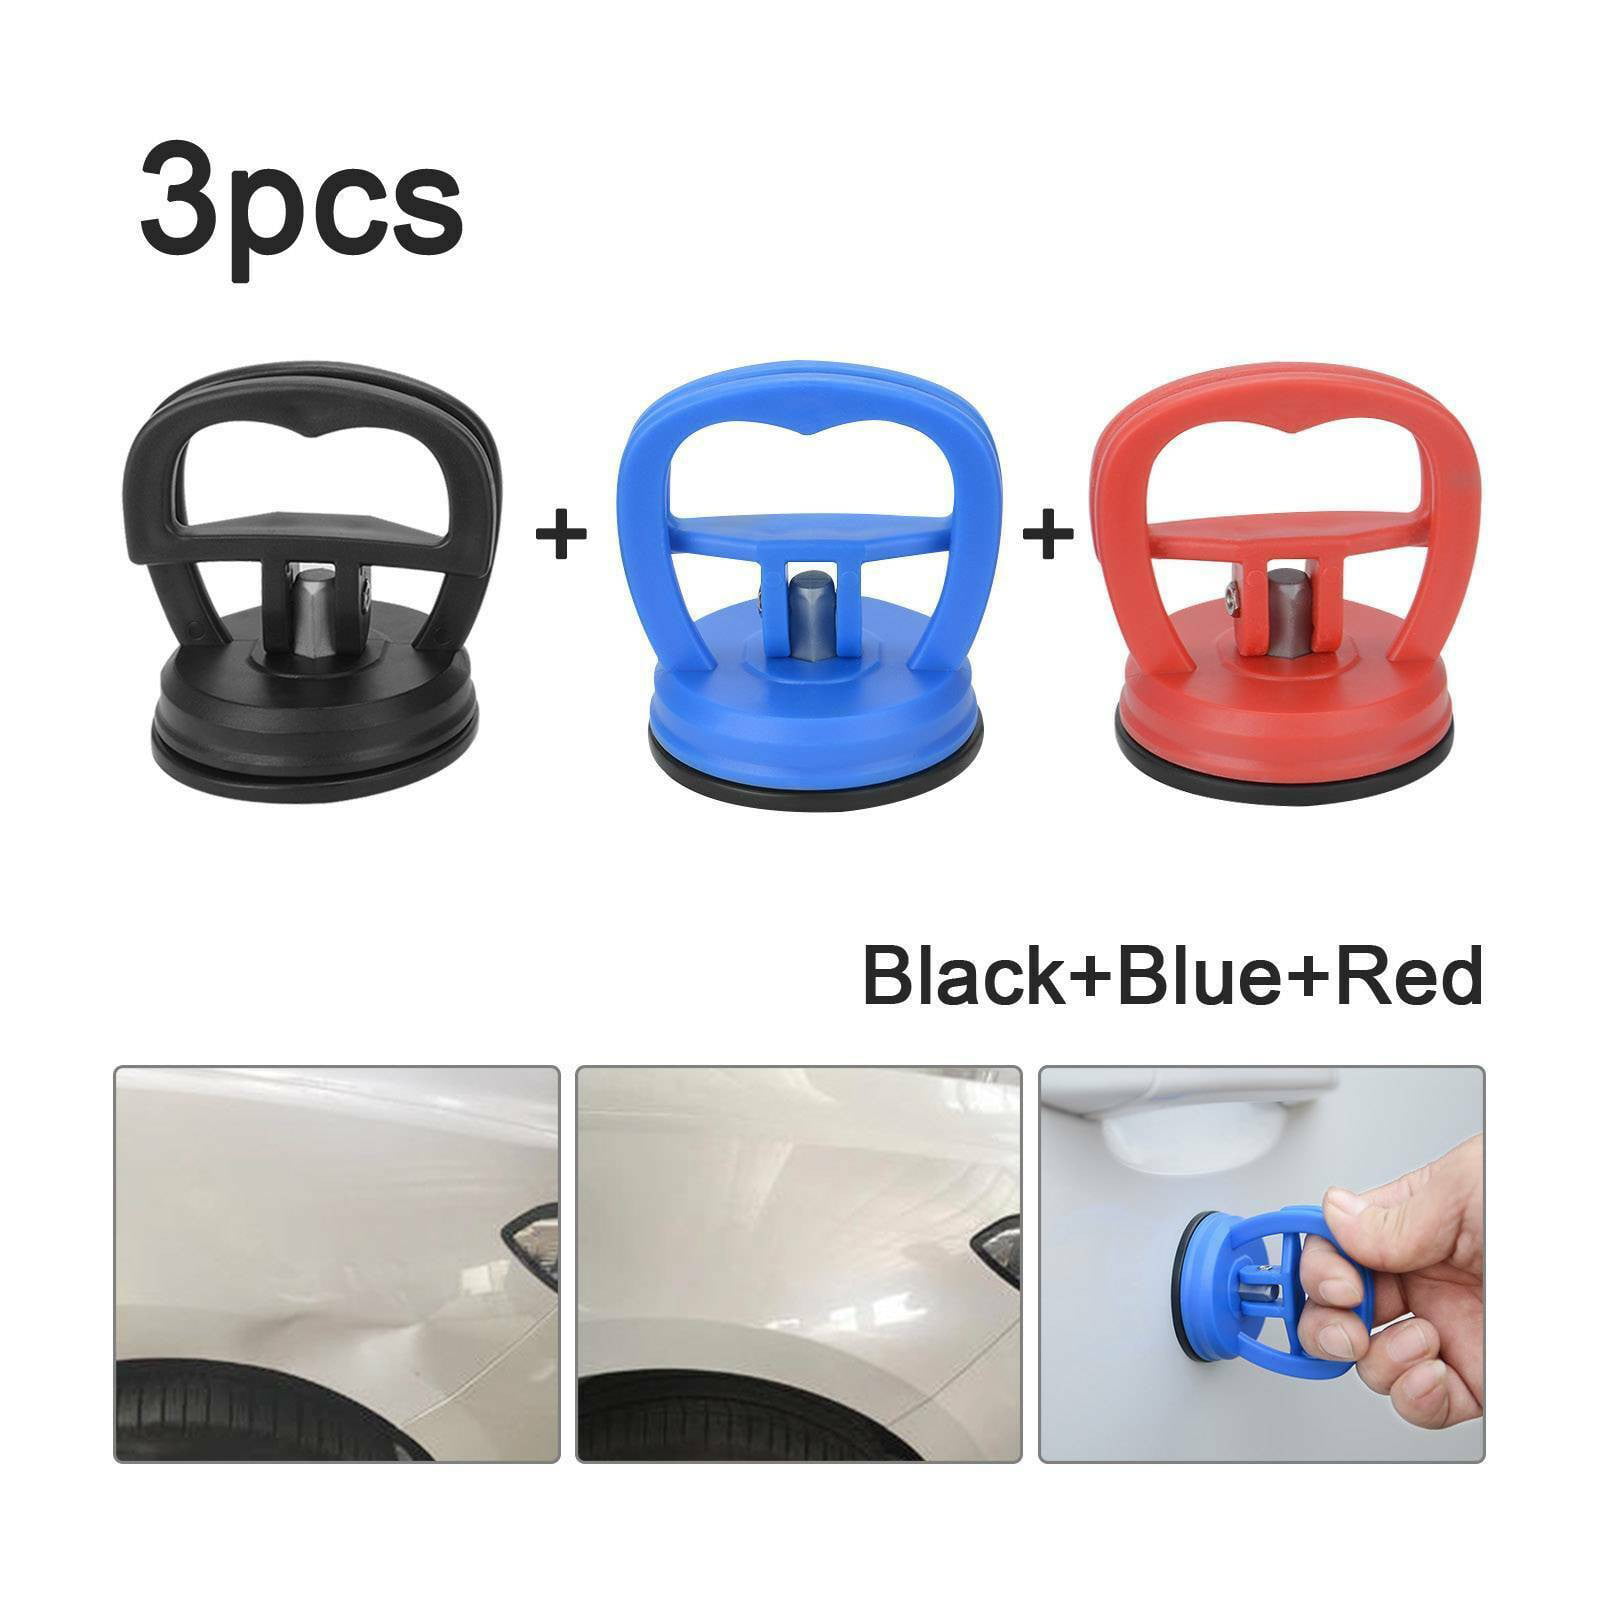 Auto Car Dent Repair Mend Puller Pull Bodywork Panel Remover Sucker Suction-Cup